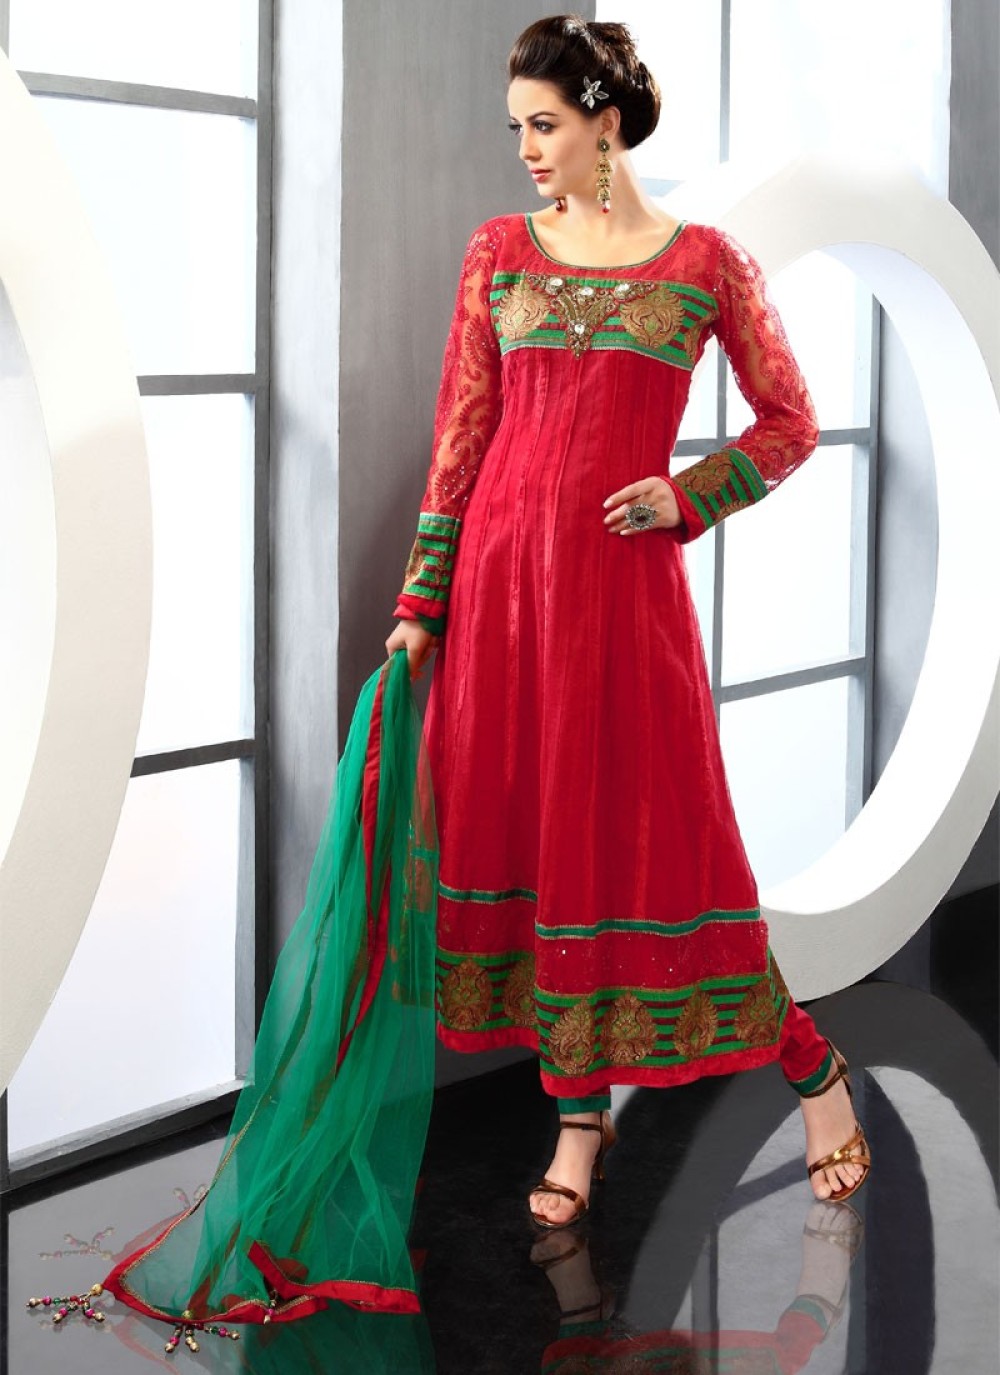 Beguiling Red Cotton Churidar Suit